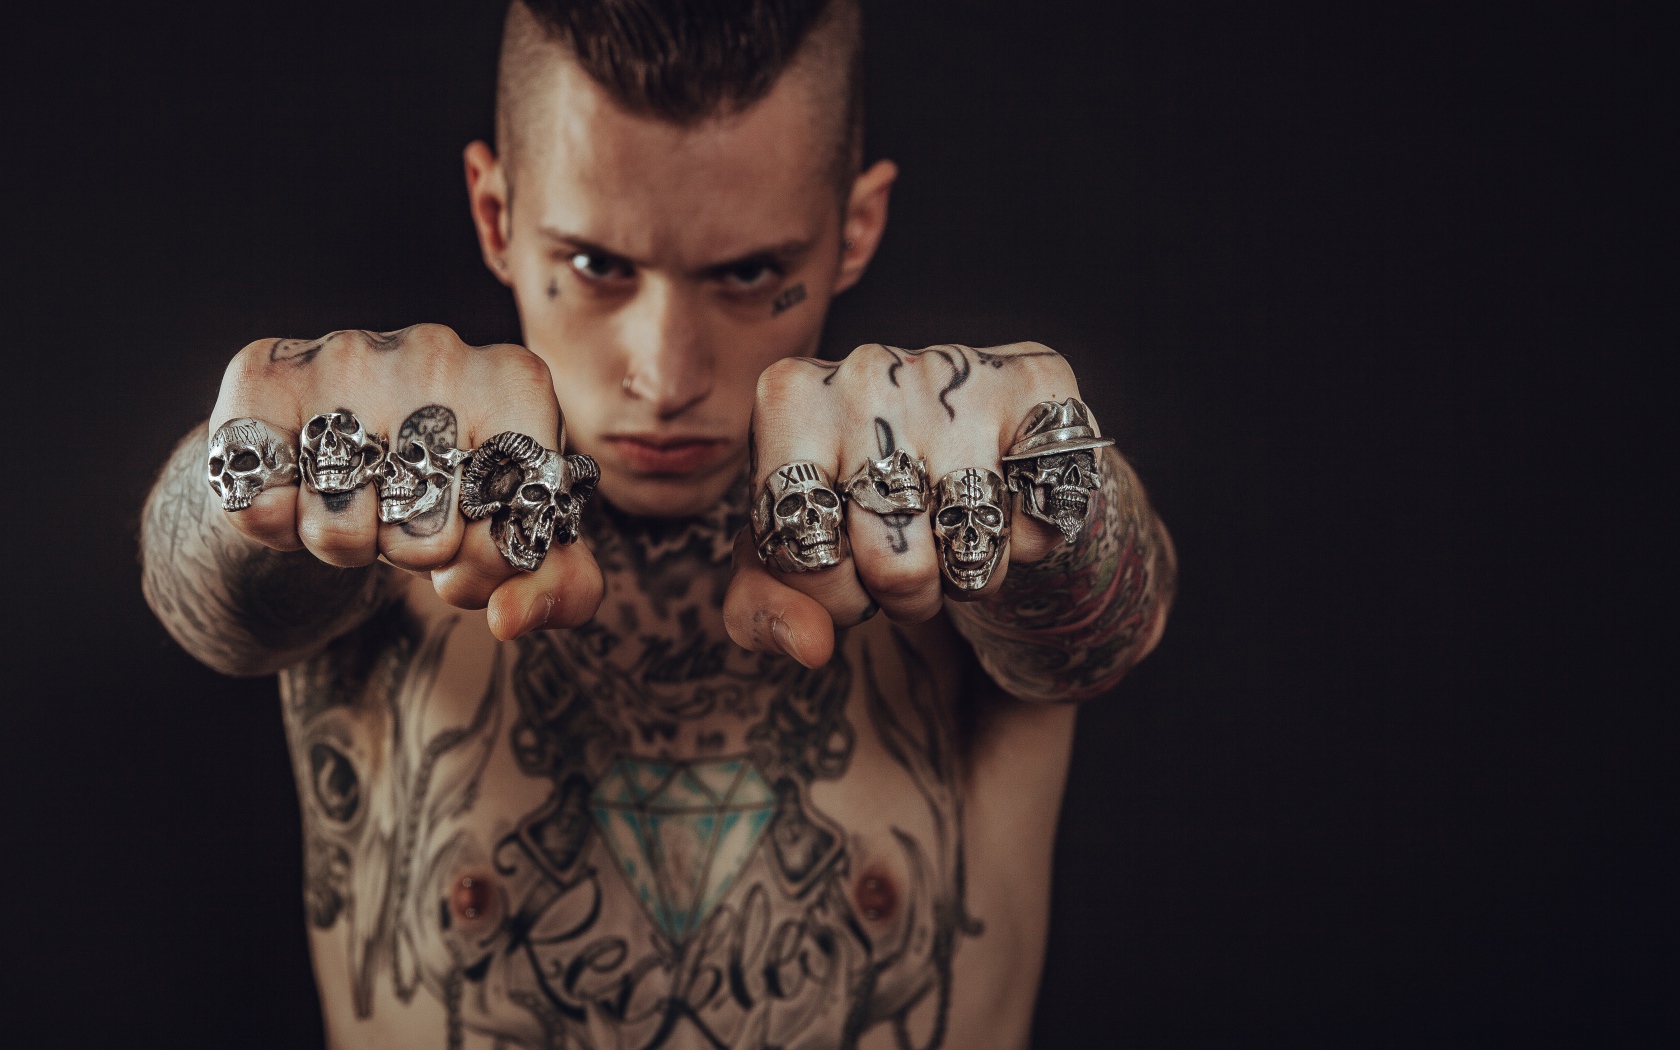 Man with tattoos on his body with rings on his fingers